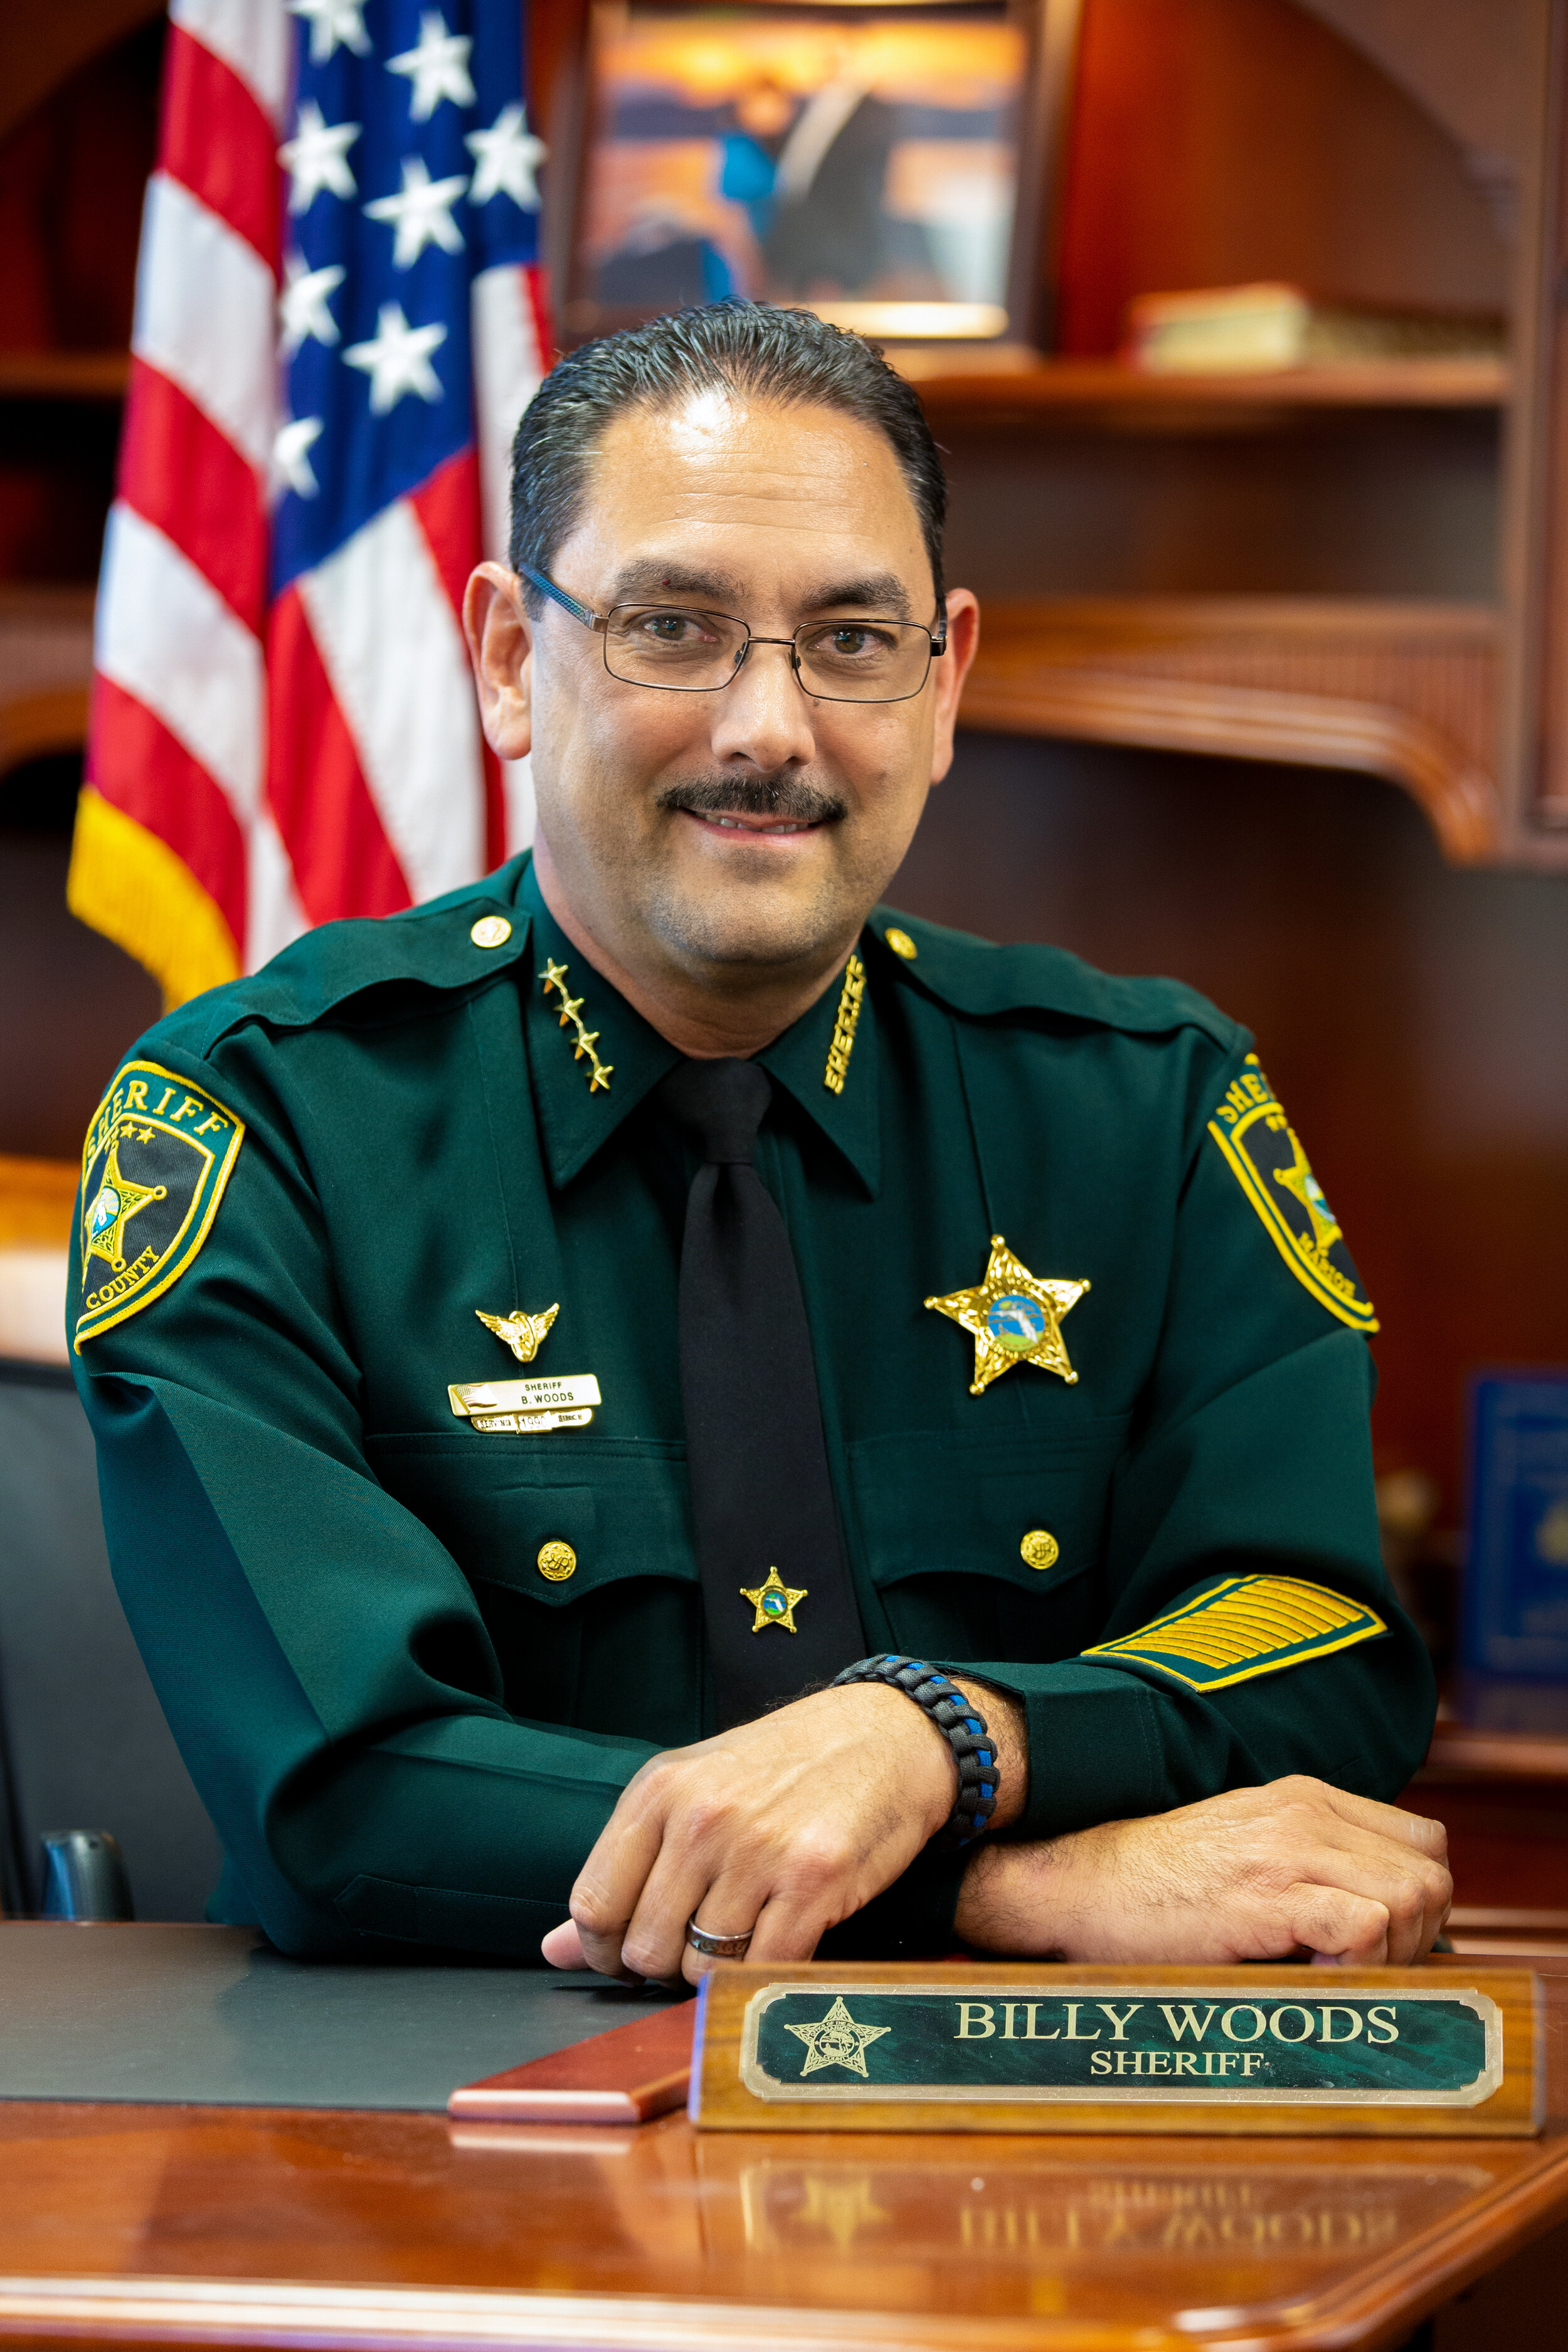 MEET THE SHERIFF — Marion County Sheriff's Office